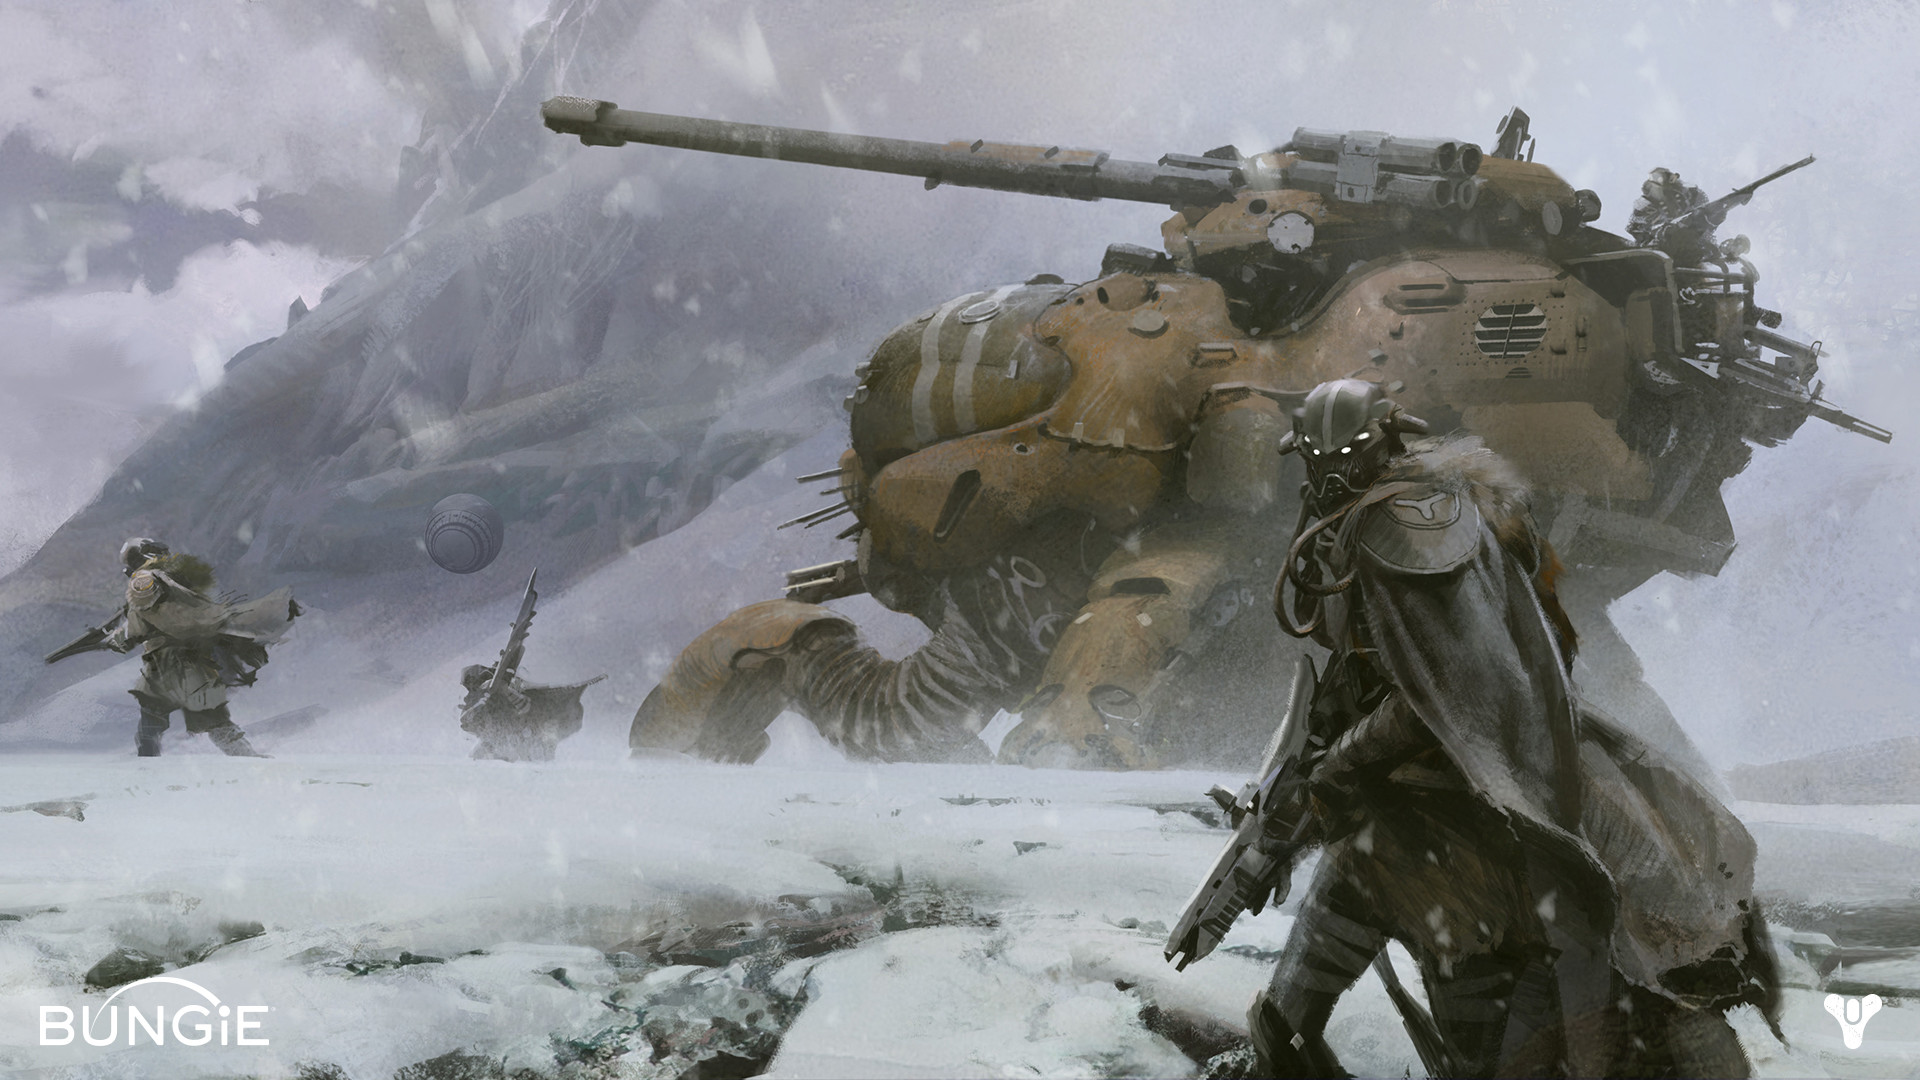 1920x1080 Story Details & Art Leak From Bungie's Next Game, the Sci-Fi Epic Destiny